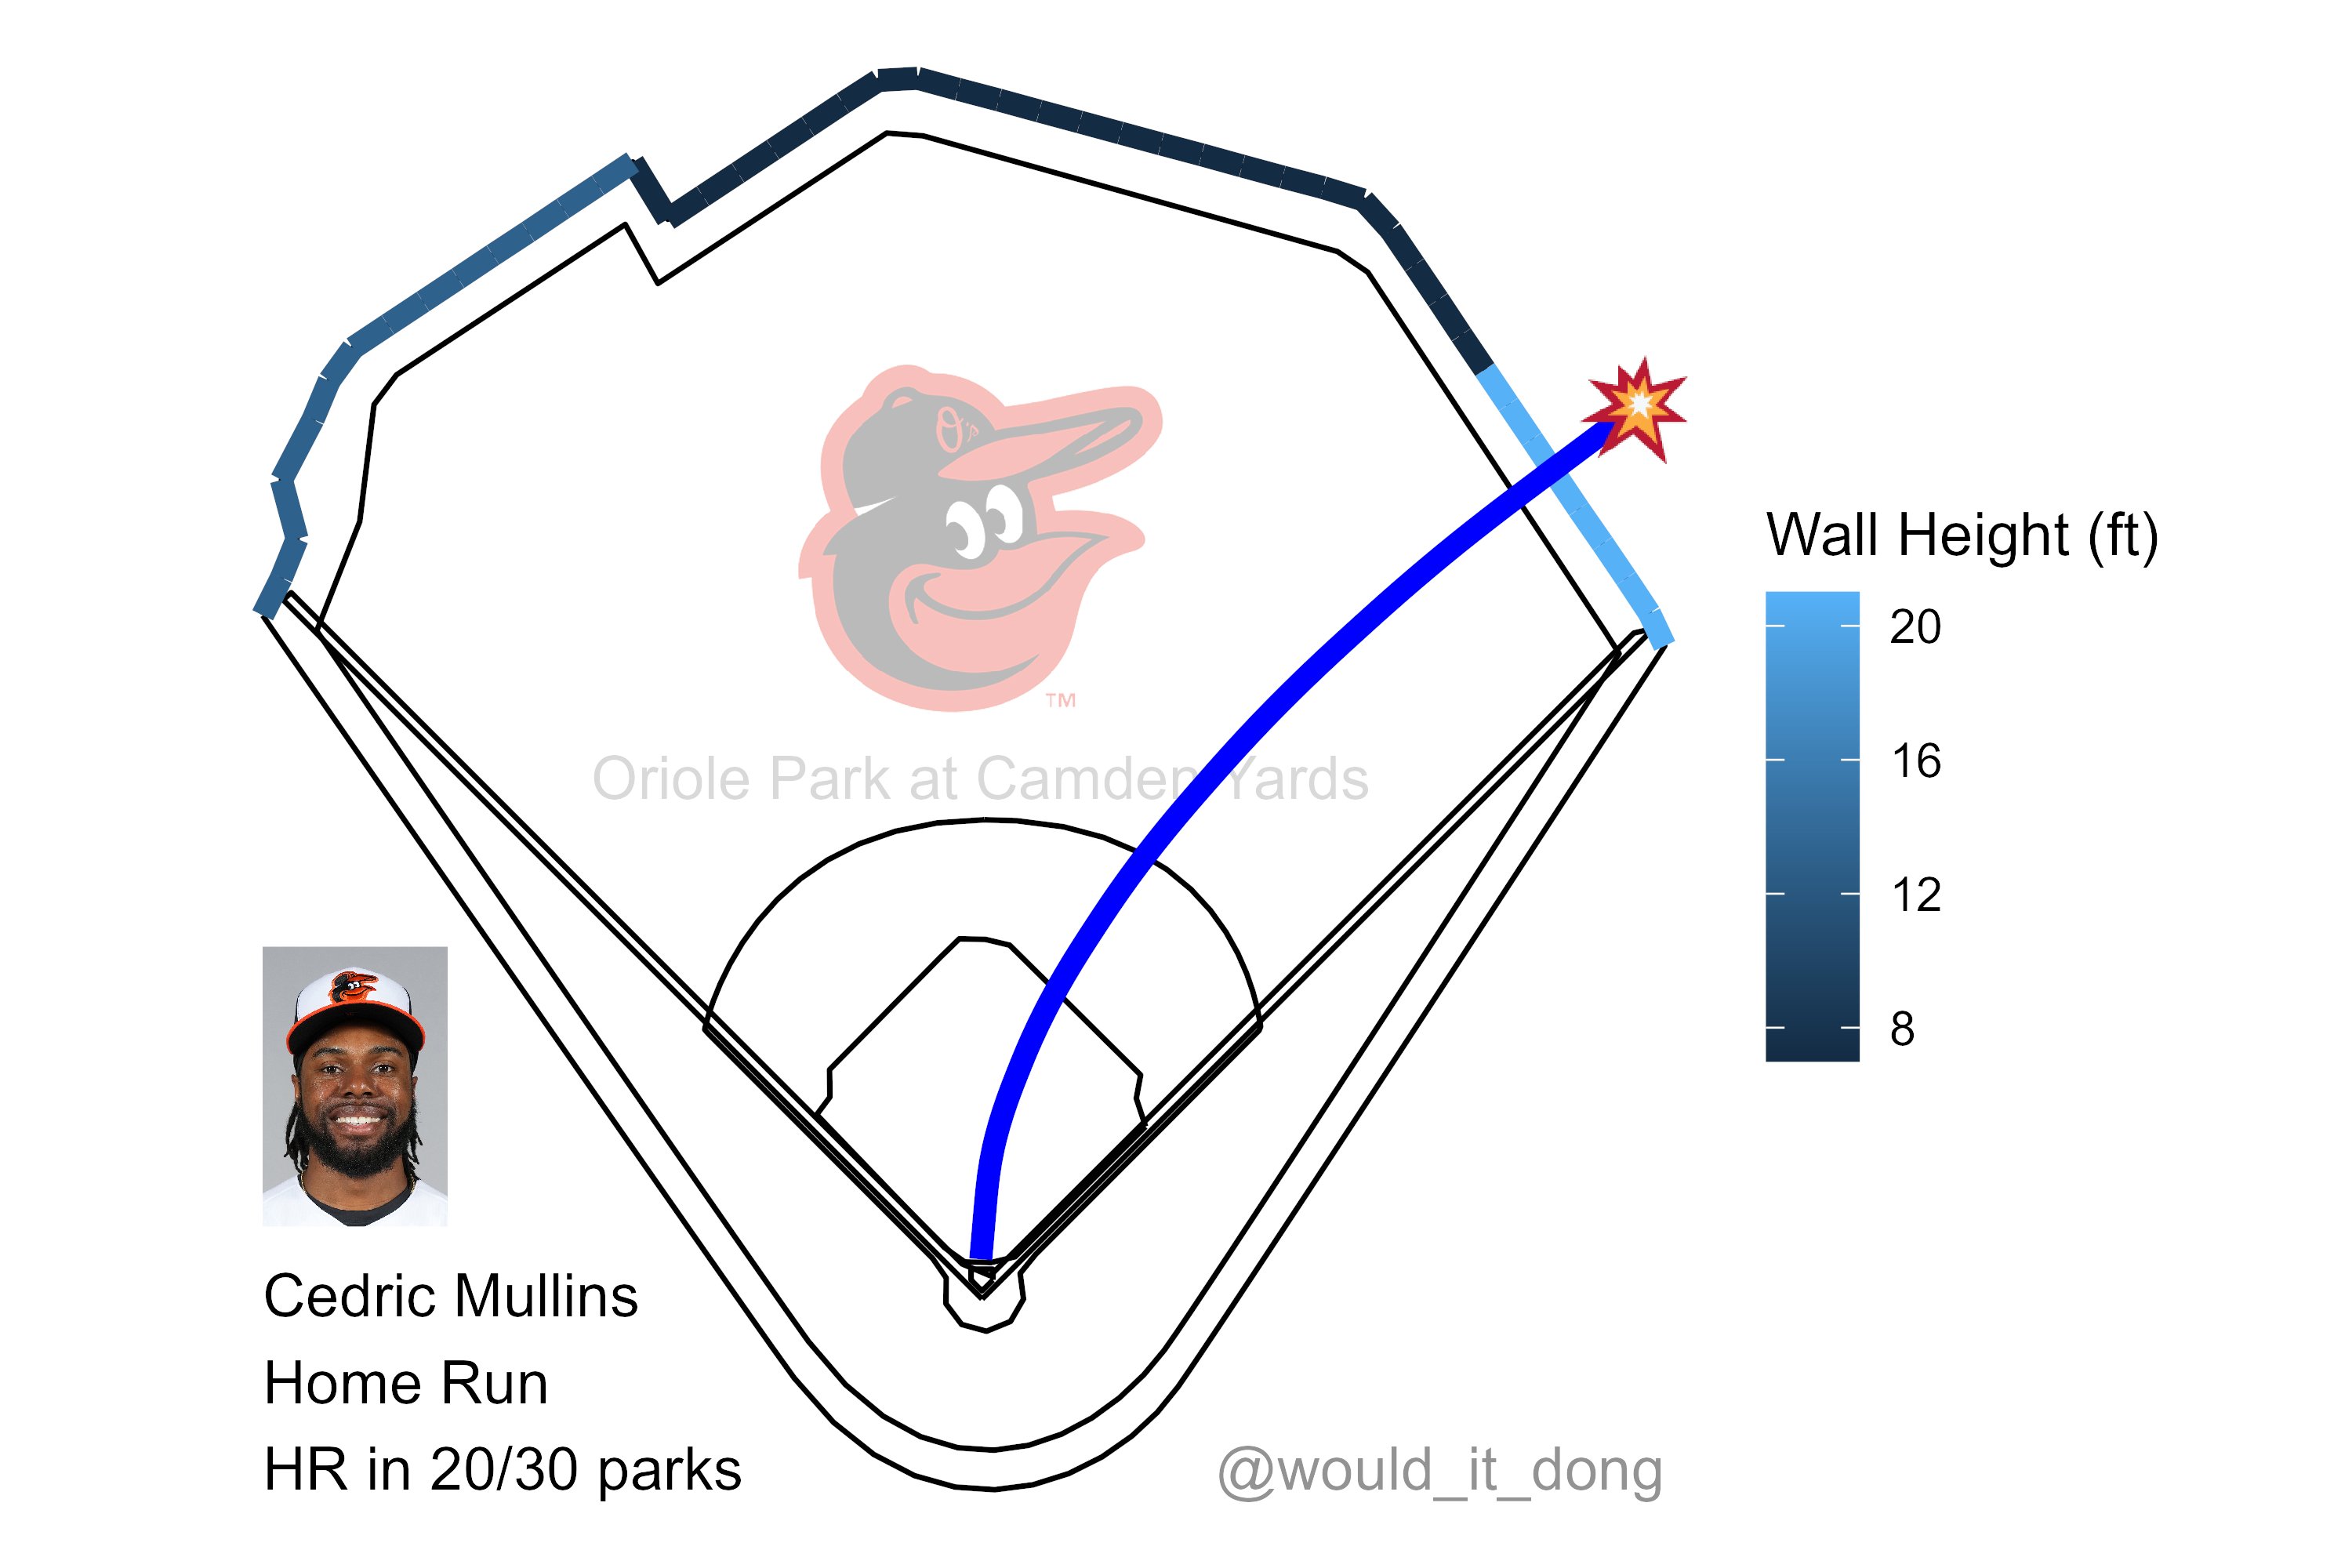 Would it dong? on X: Cedric Mullins vs Kaleb Ort #Birdland Grand Slam (3)  ⚾ Exit velo: 102.6 mph Launch angle: 23 deg Proj. distance: 366 ft This  would have been a